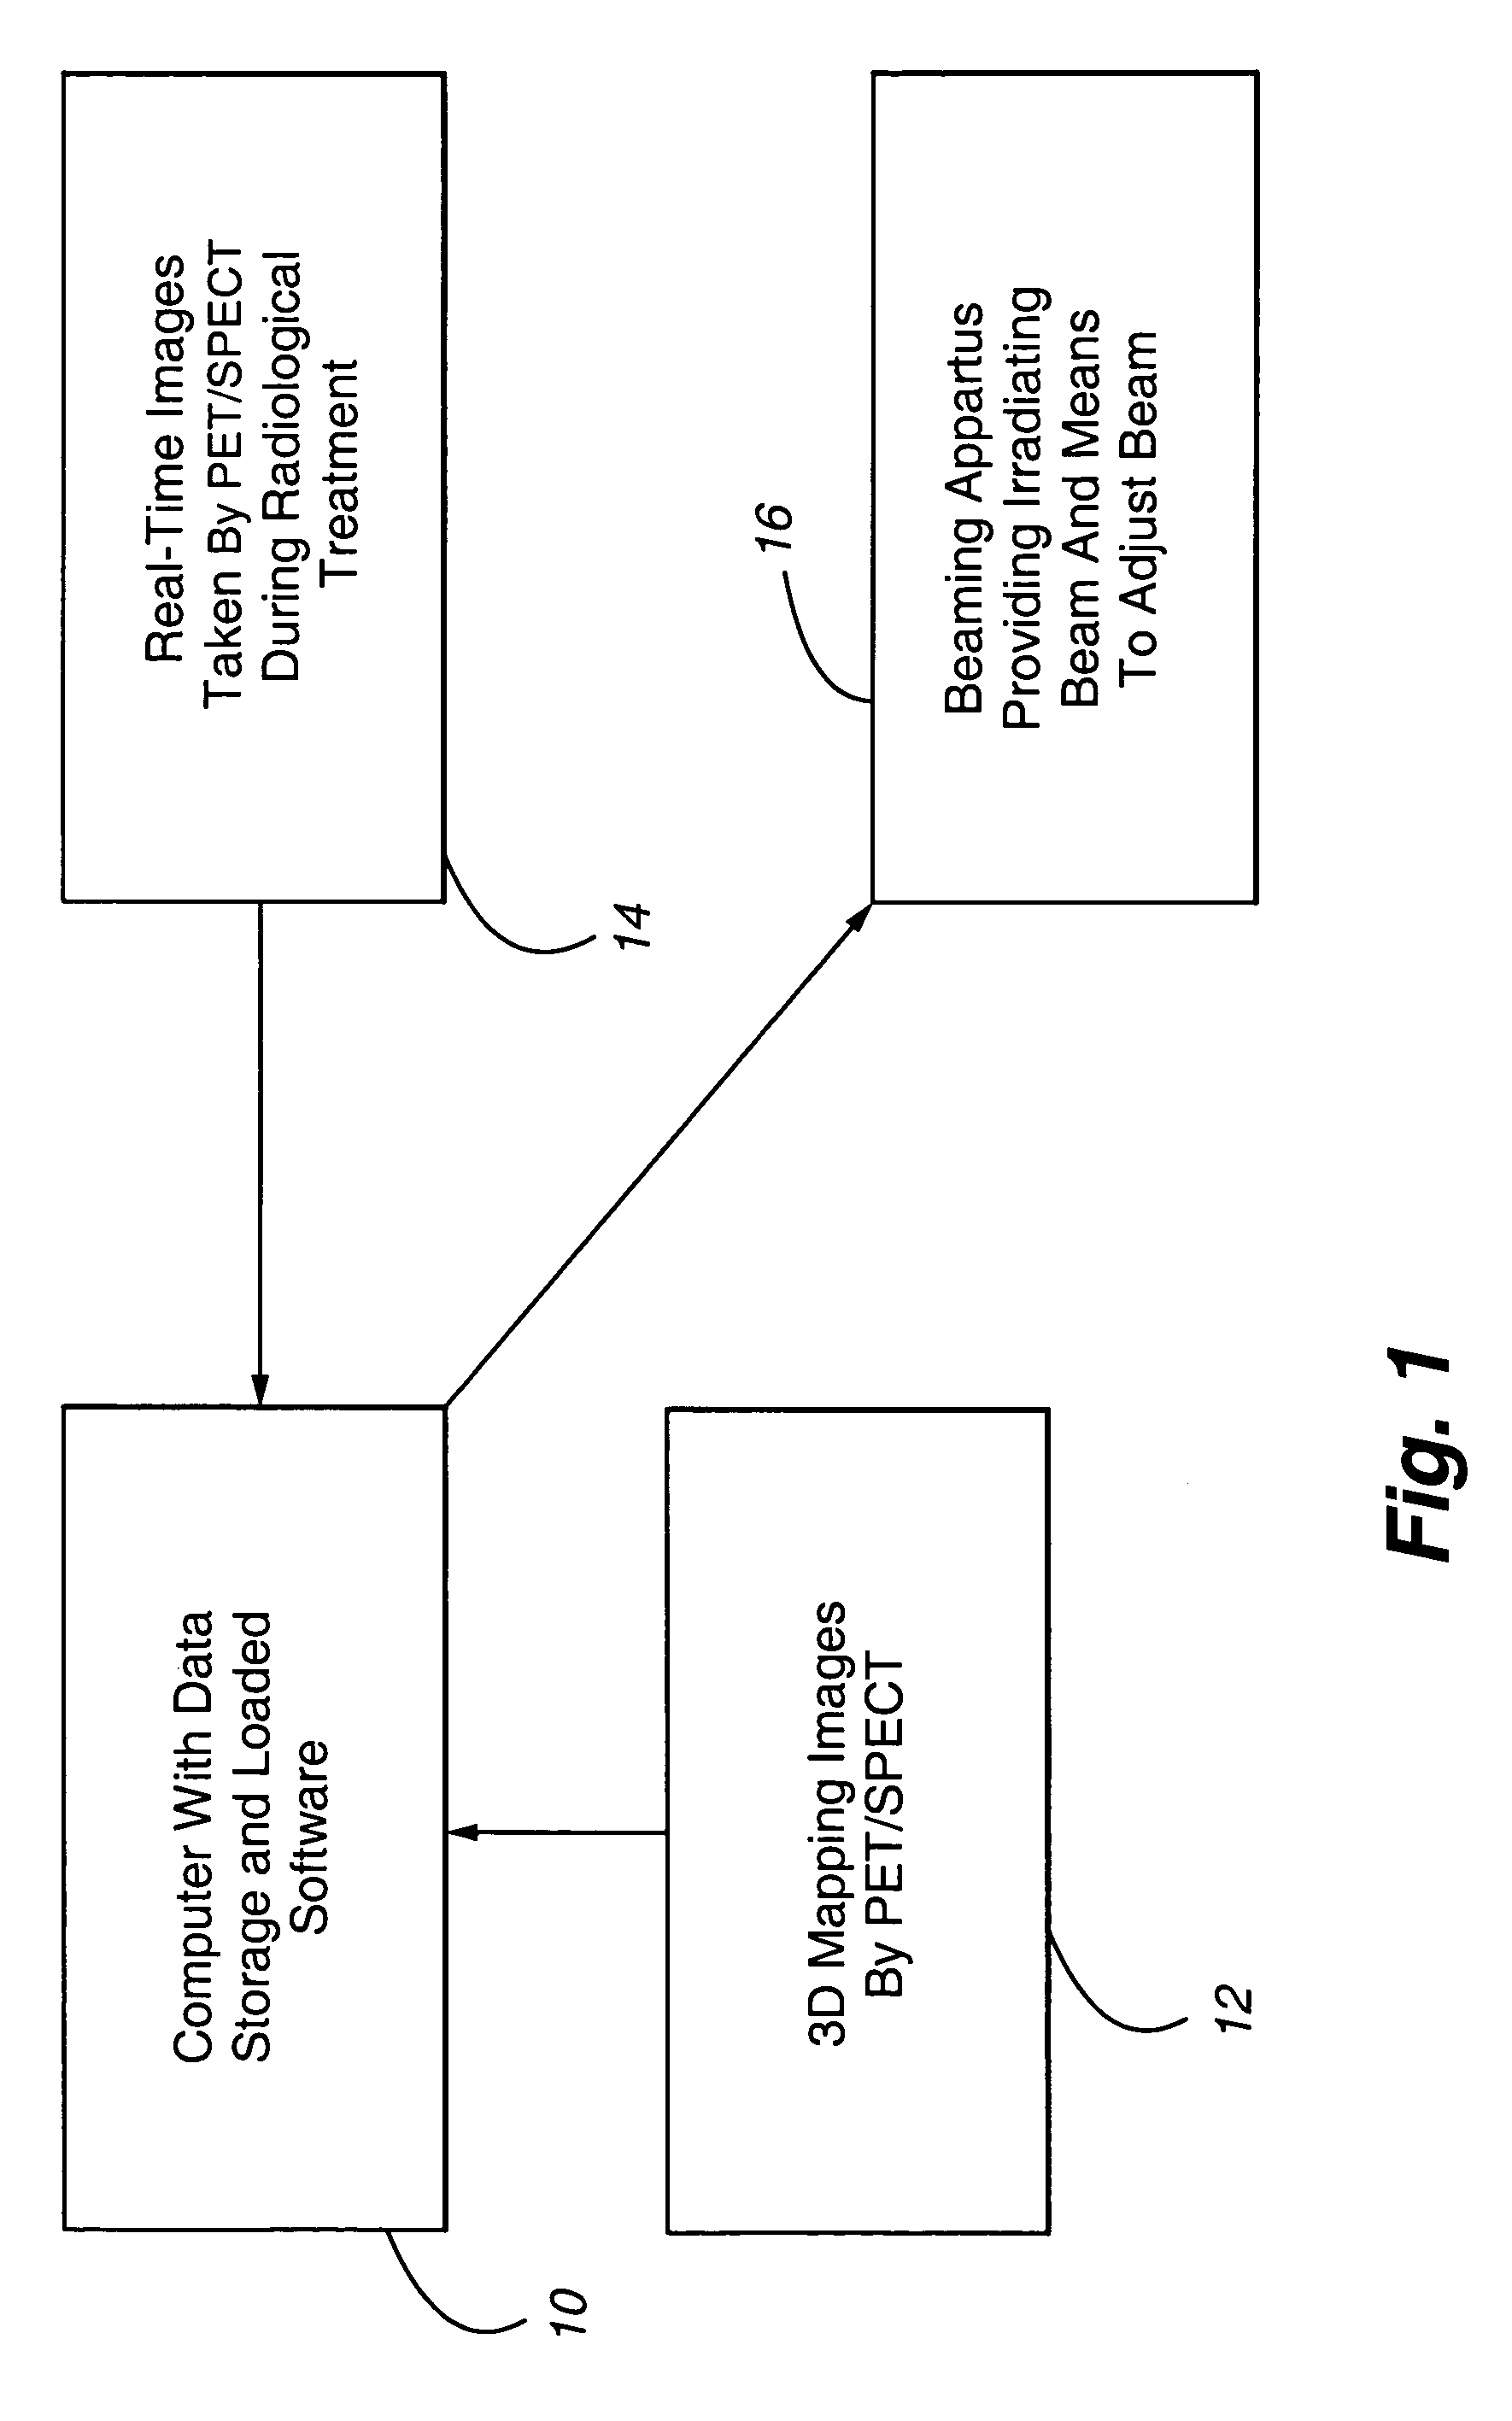 Method of optimizing radiosurgery and radiotherapy with metalloporphyrins